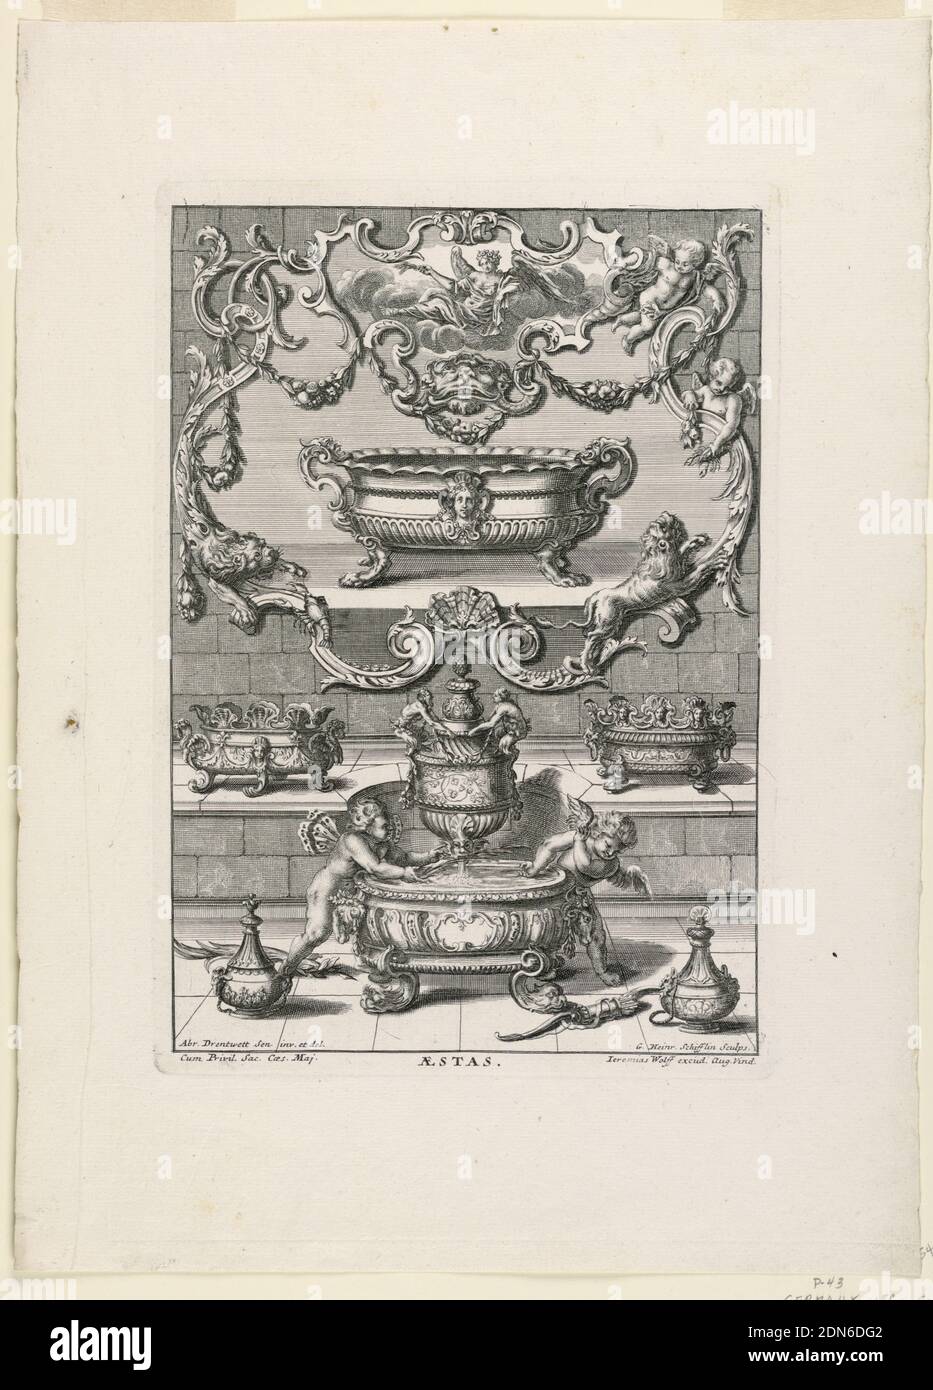 Unterschiedlich Augspurgische Goldschmidts Arbeit, 'Aestas' (Summer), Plate 2, Abraham Drentwet, 1647 – 1727, Jeremias Wolff, German, 1663–1750, Engraving on white laid paper, A large frame on a wall consisting of scrolls, putti, a lion, a mascaron, fruit and flower festoons and a lobster. Inside the frame is a large tureen with lion's feet and a woman's face at center. Below the frame, there are smaller tureens at left and right; at center a fountain in the shape of an urn with two putti playing., Germany, 1721–40, furniture, Print Stock Photo